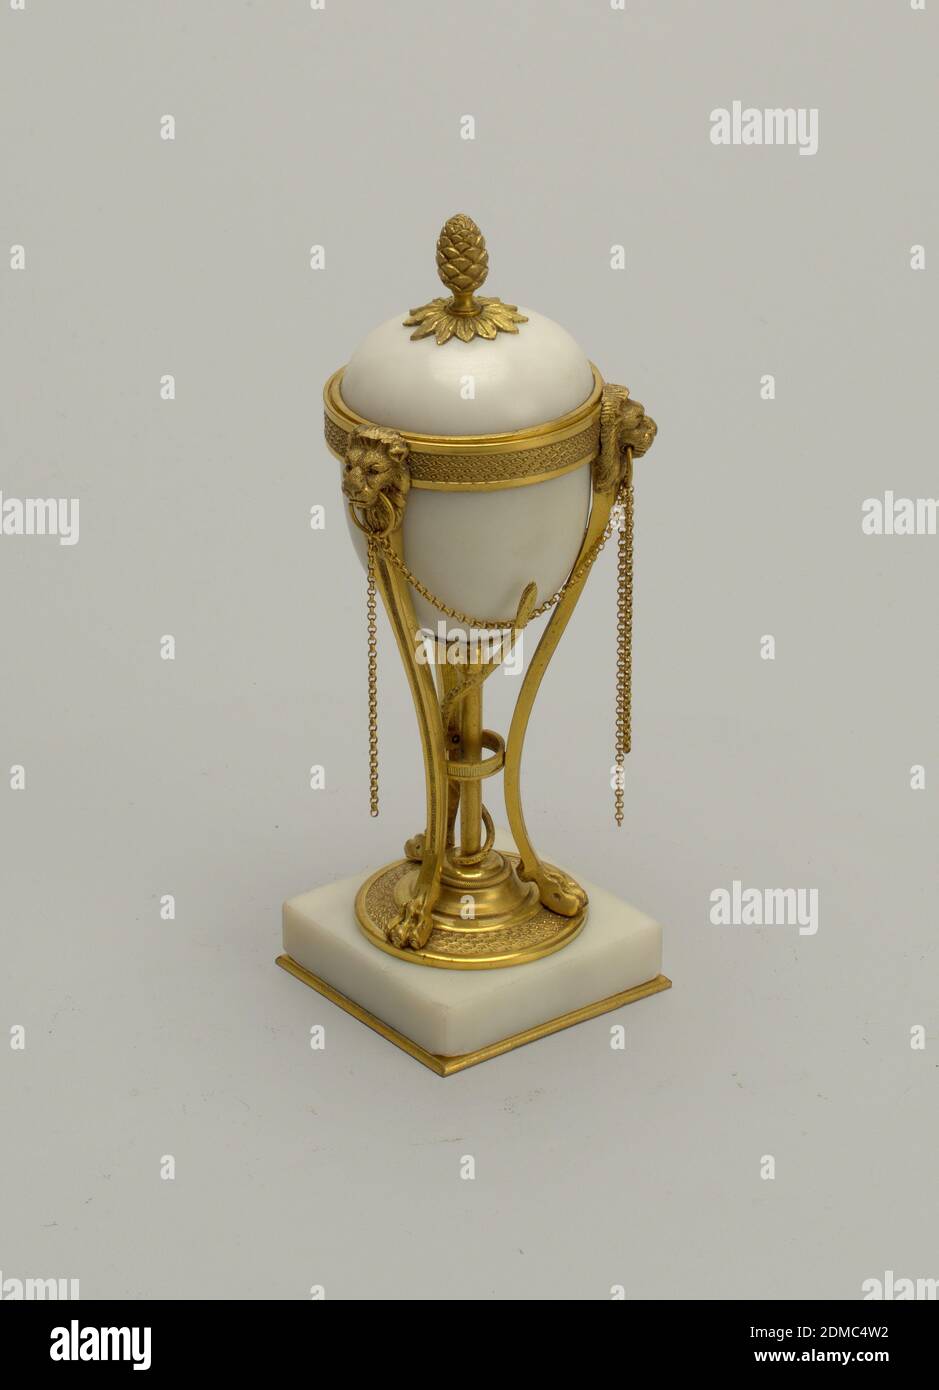 Cassolette (perfume burner or essence vessel), Marble, gilt bronze, Part a, square marble plinth supporting gilt bronze tripod with lions feet and heads; snake twisted around center stem; marble bowl mounted in wide band; double chains hanging from ring held by lions' heads. Part b, dome-shaped marble lid with gilt bronze pine cone finial; interior fitted with gilt bronze nozzle for candle (can be inverted to act as candle holder)., France, ca. 1785–90, metalwork, Decorative Arts, Cassolette (perfume burner or essence vessel Stock Photo